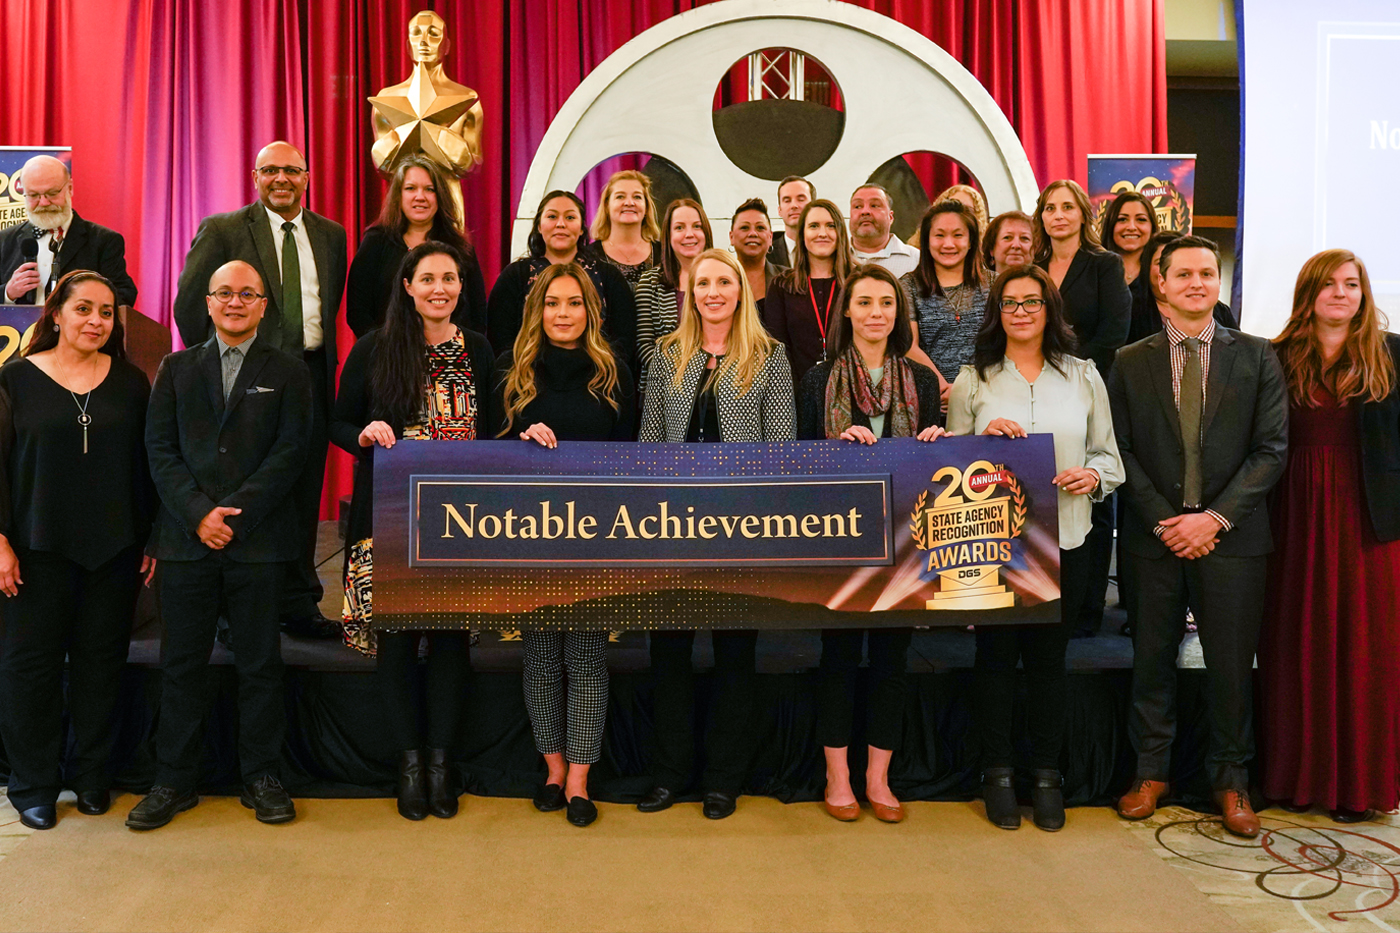 Representatives from the departments that won the Notable Achievement award pose for a group photo on stage with a "Notable Achievement" banner.